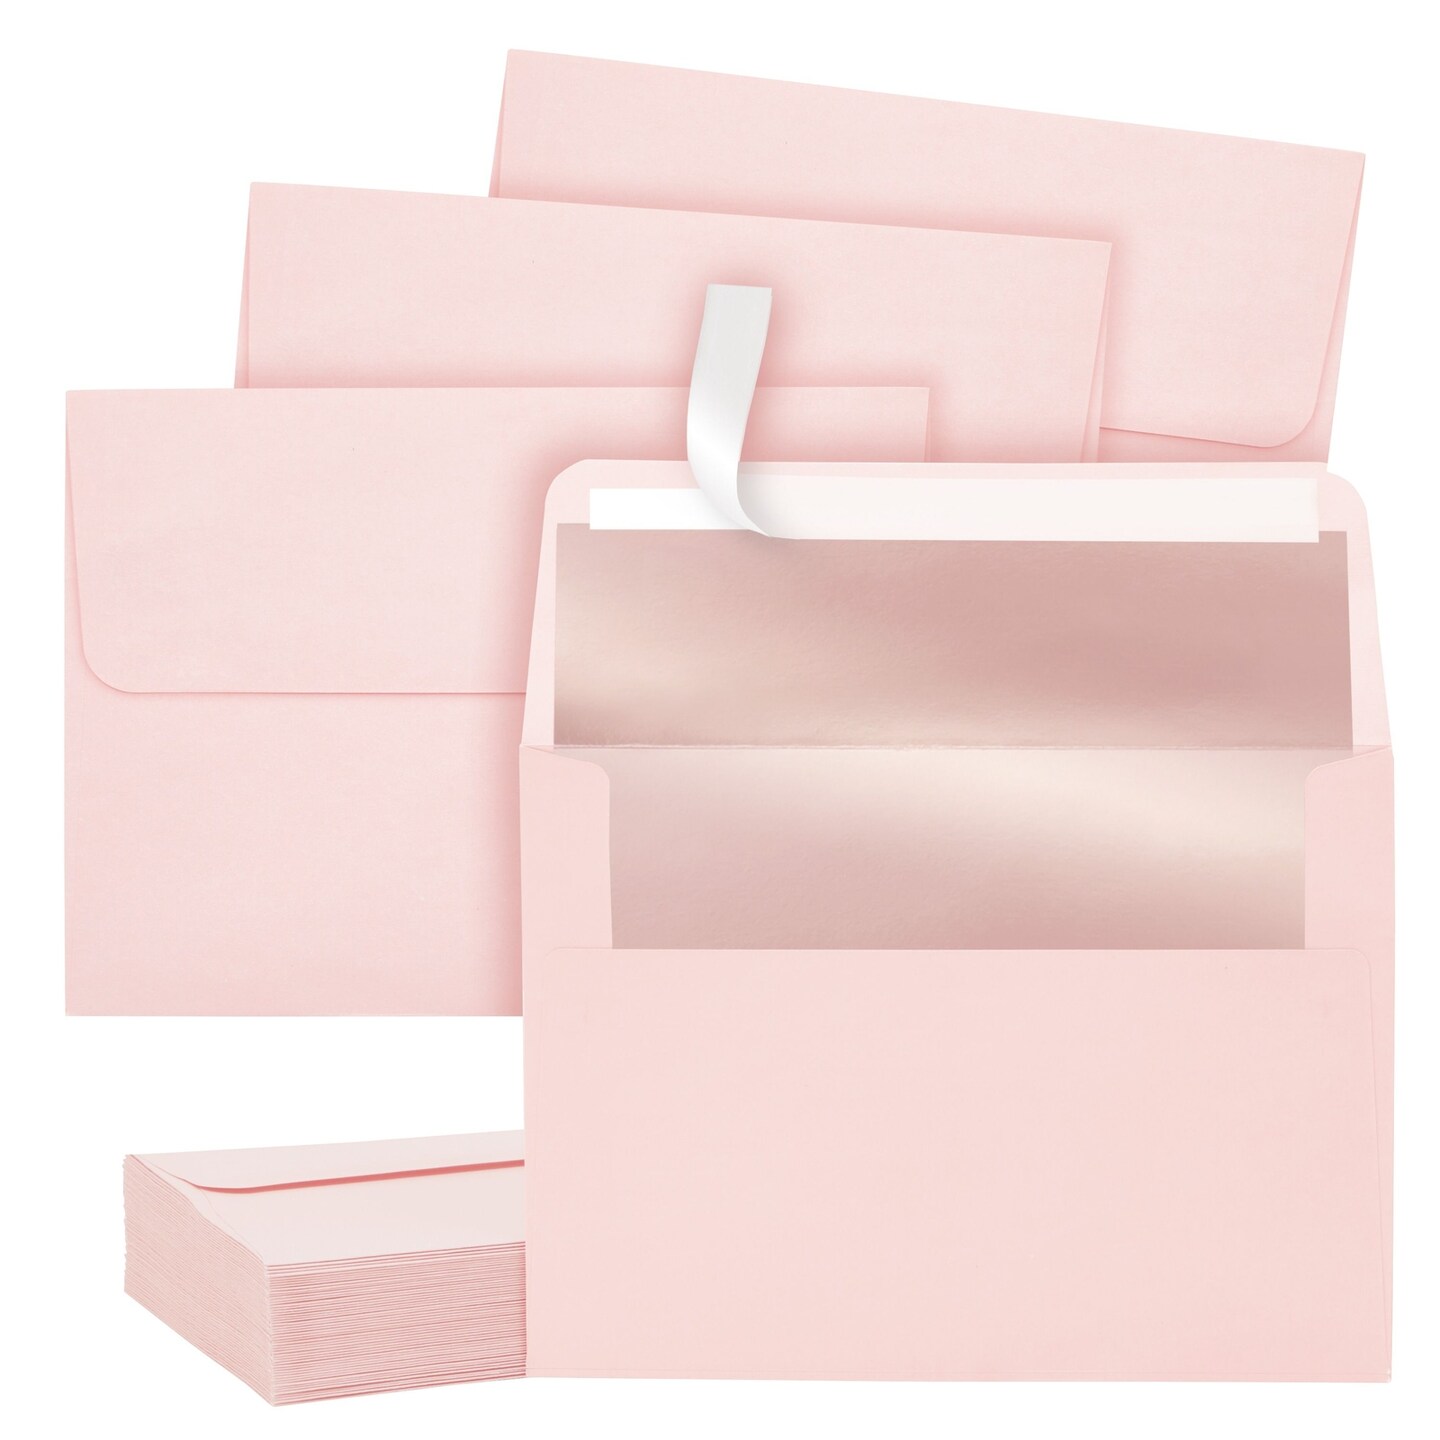 50 Pack Pink A7 Envelopes, 5x7 Size for Mailing Wedding